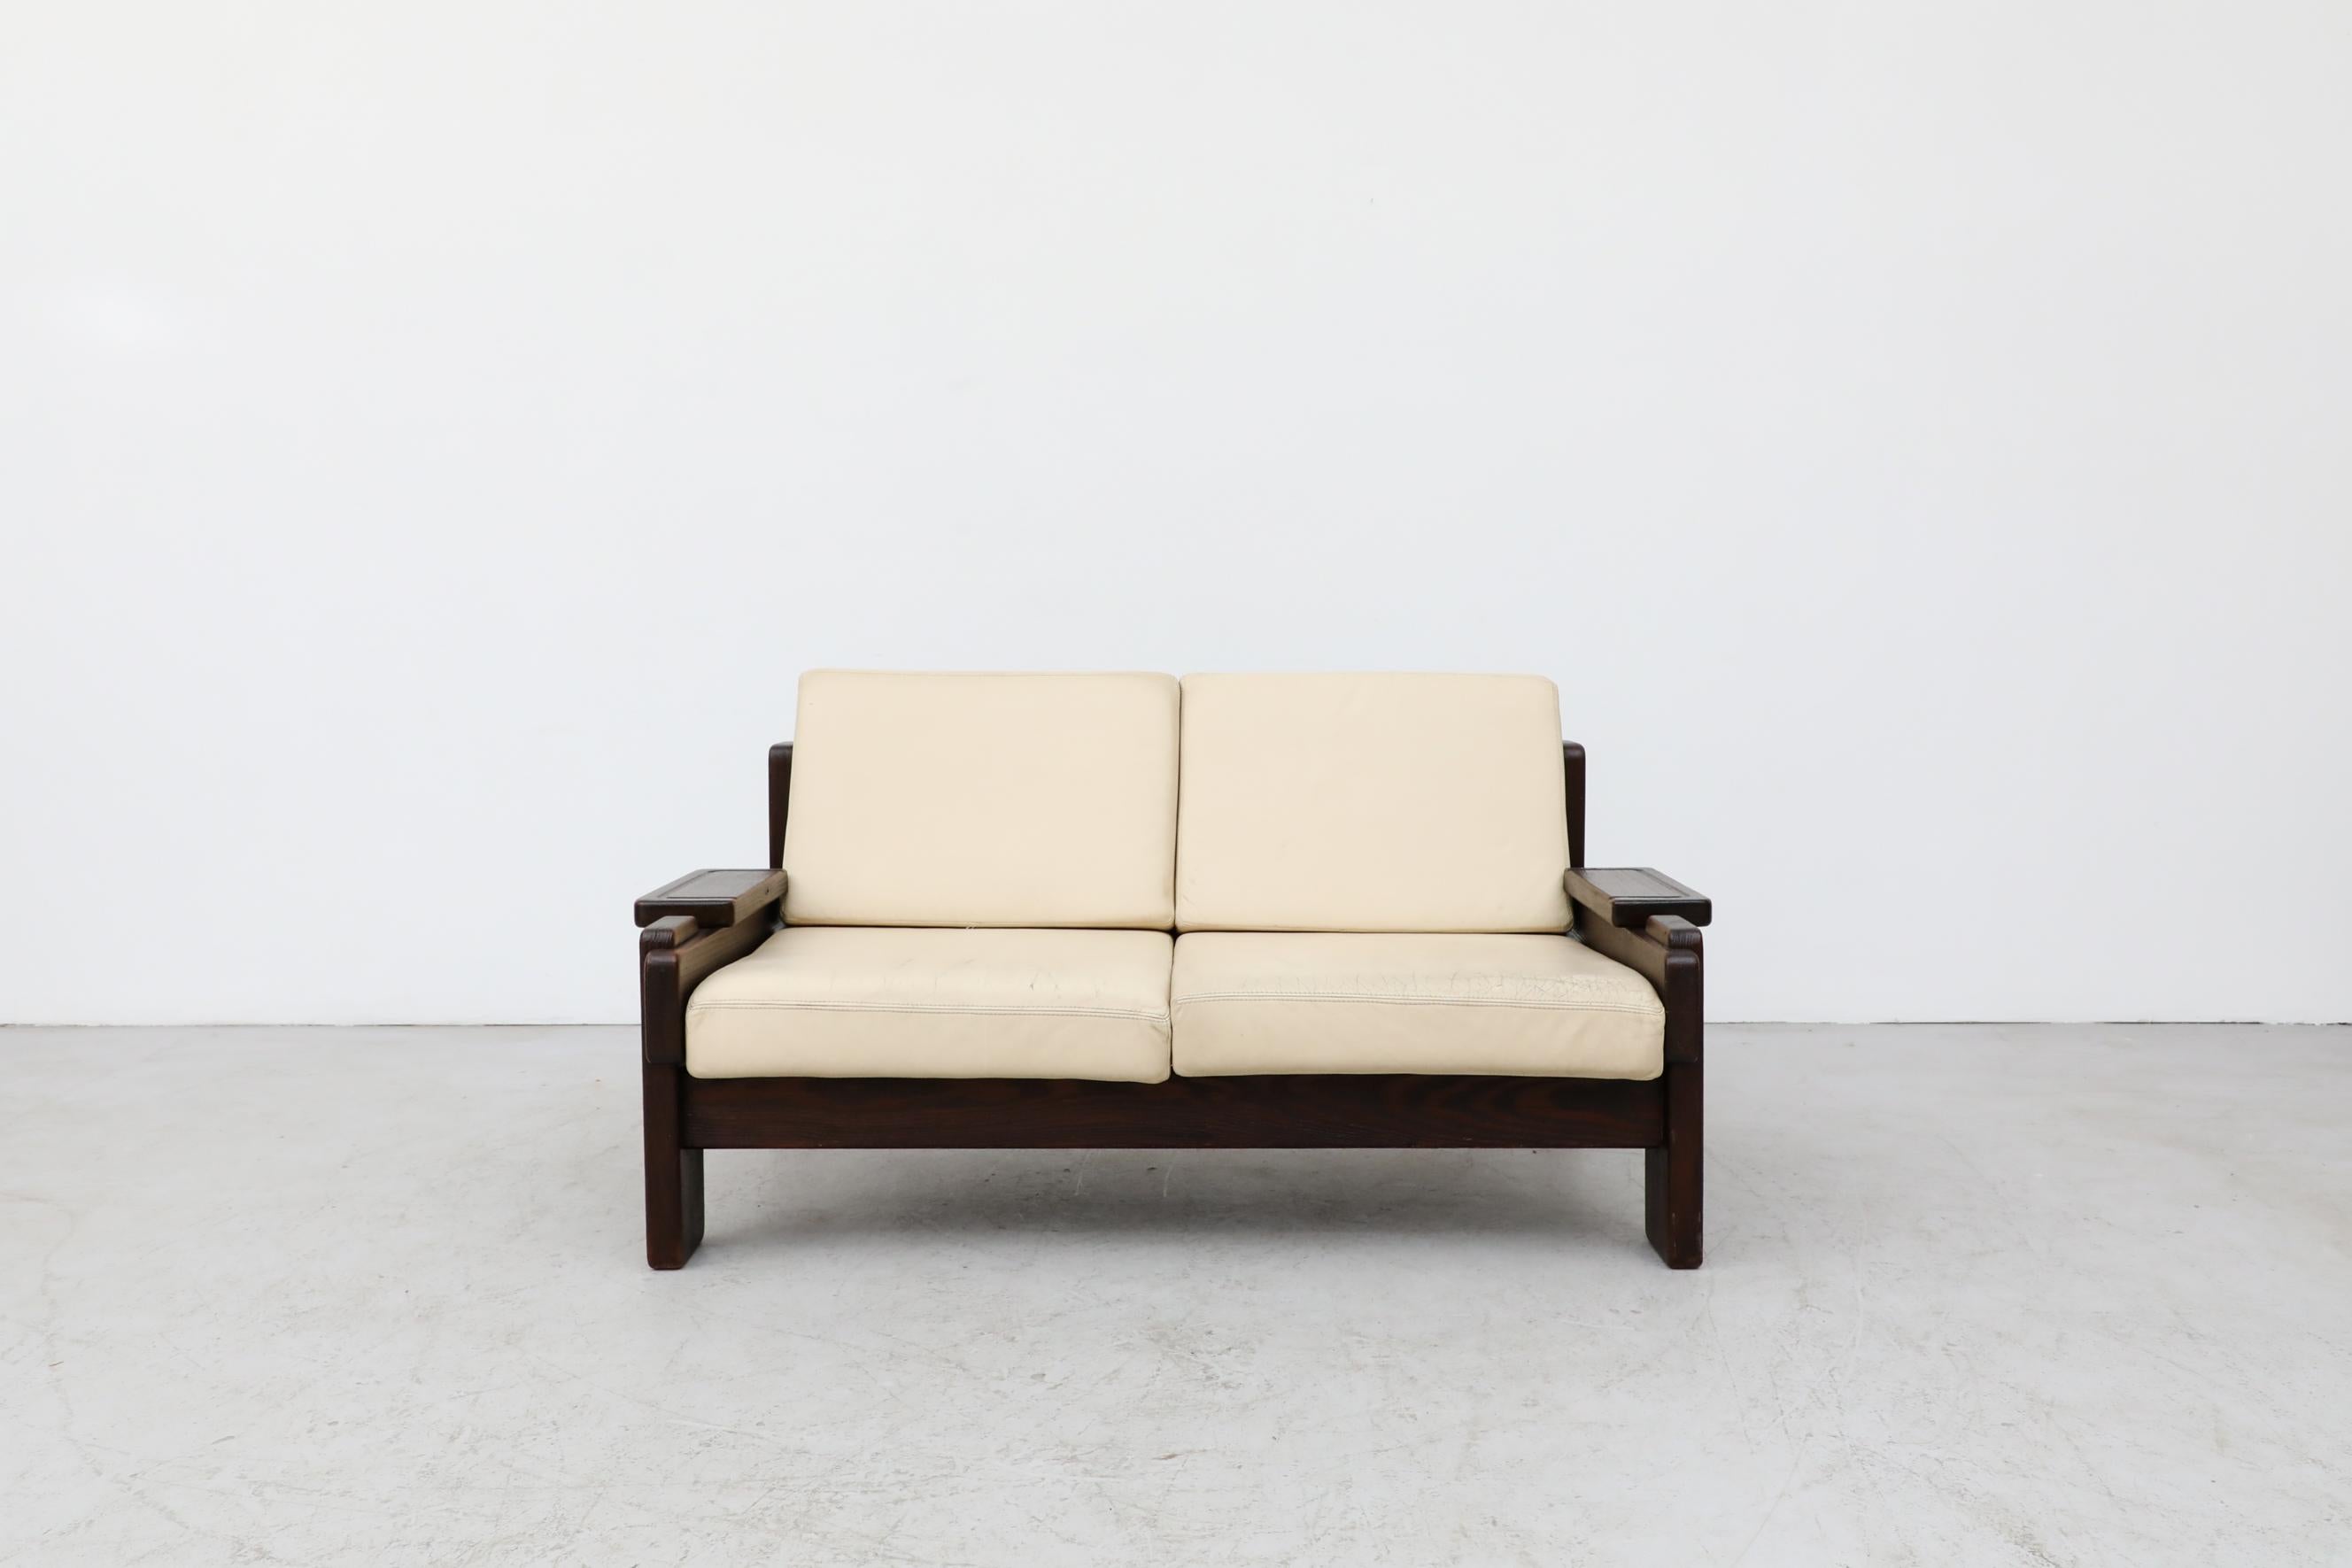 70's Brutalist leather loveseat with cream cushions and a dark heavy wood frame. In original condition with visible wear to the leather, consistent with its age and use. A matching 3 seater sofa is available and listed separately (LU922428505952).